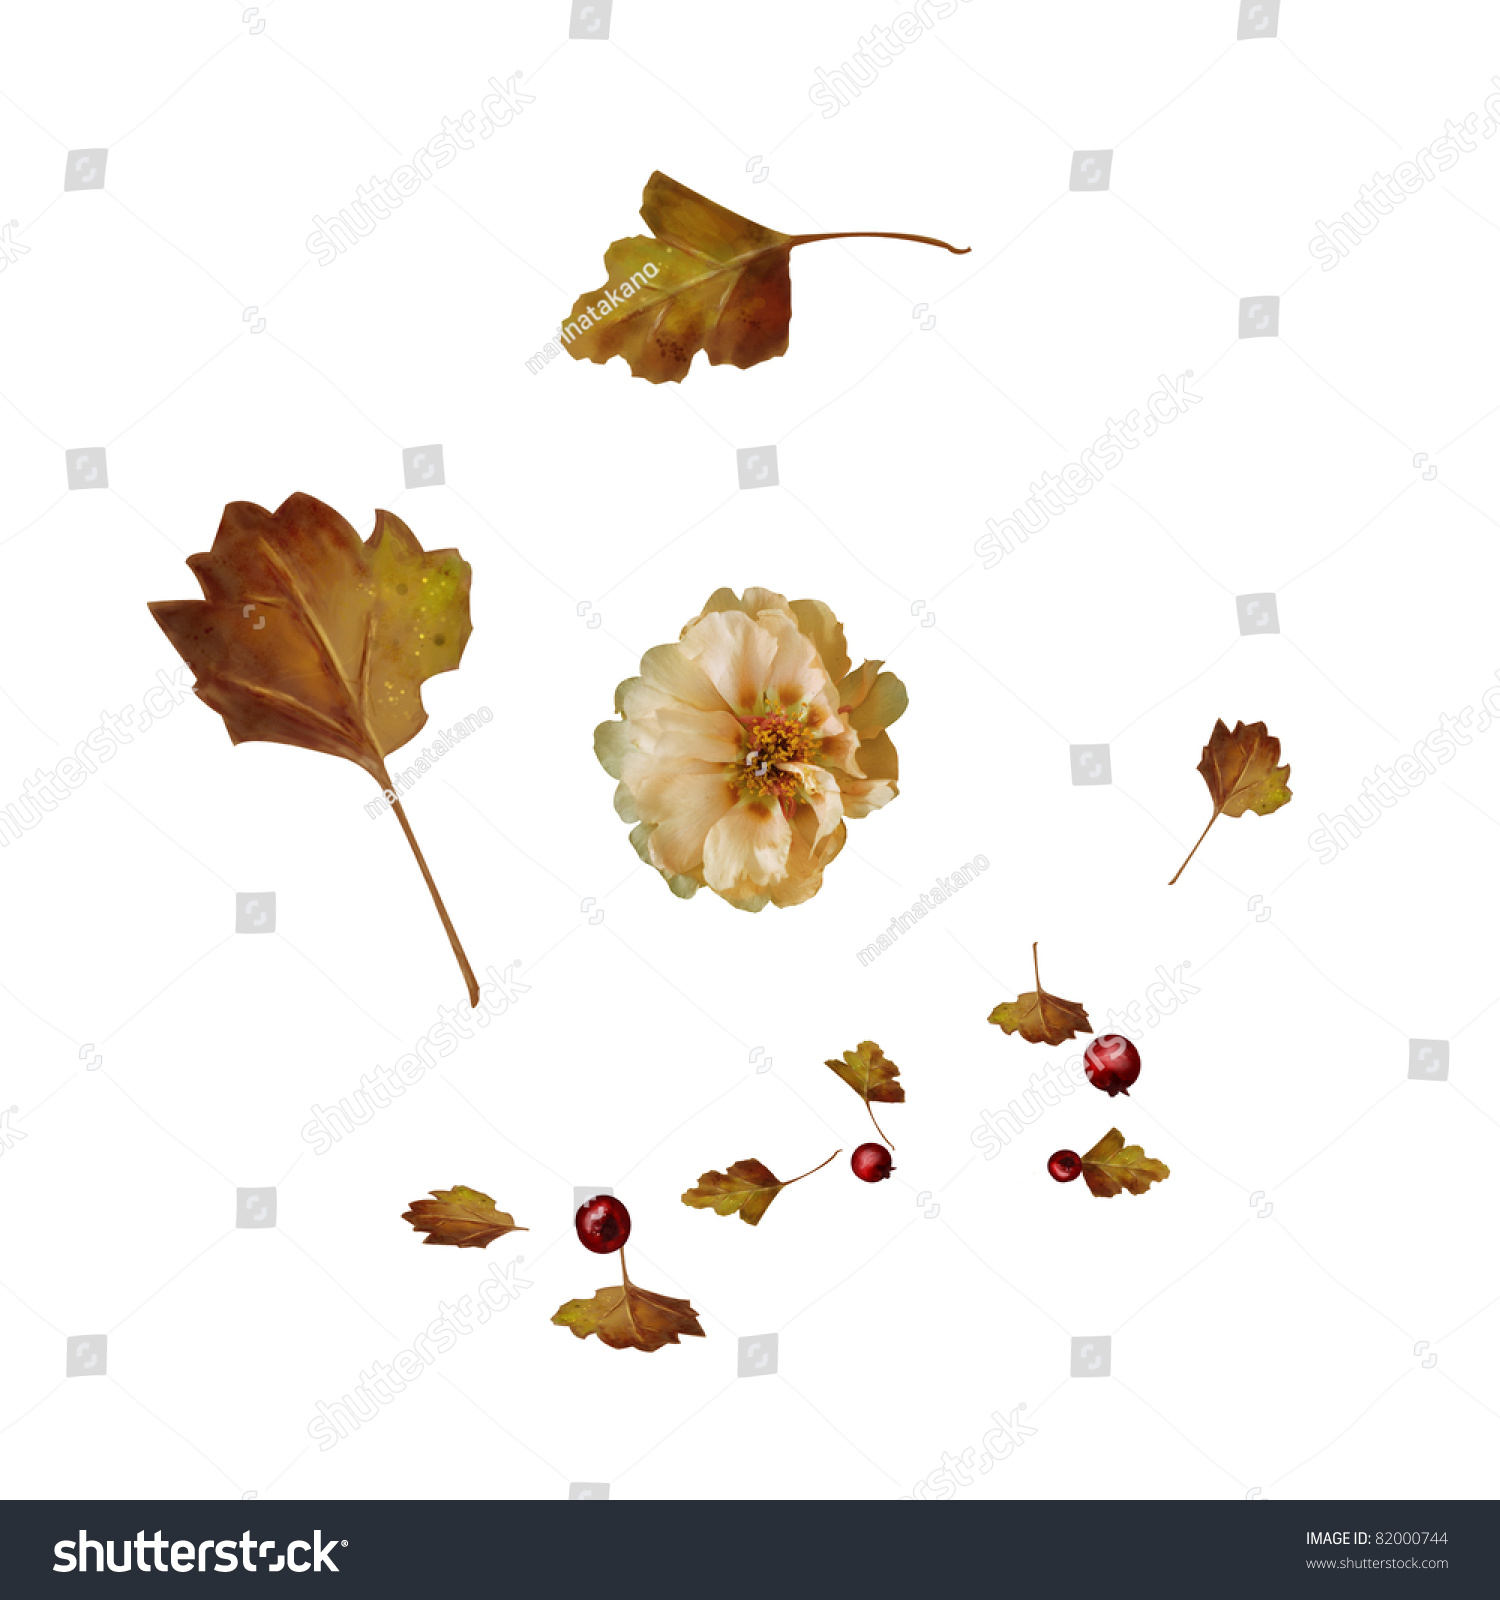 clipart flowers and leaves - photo #12